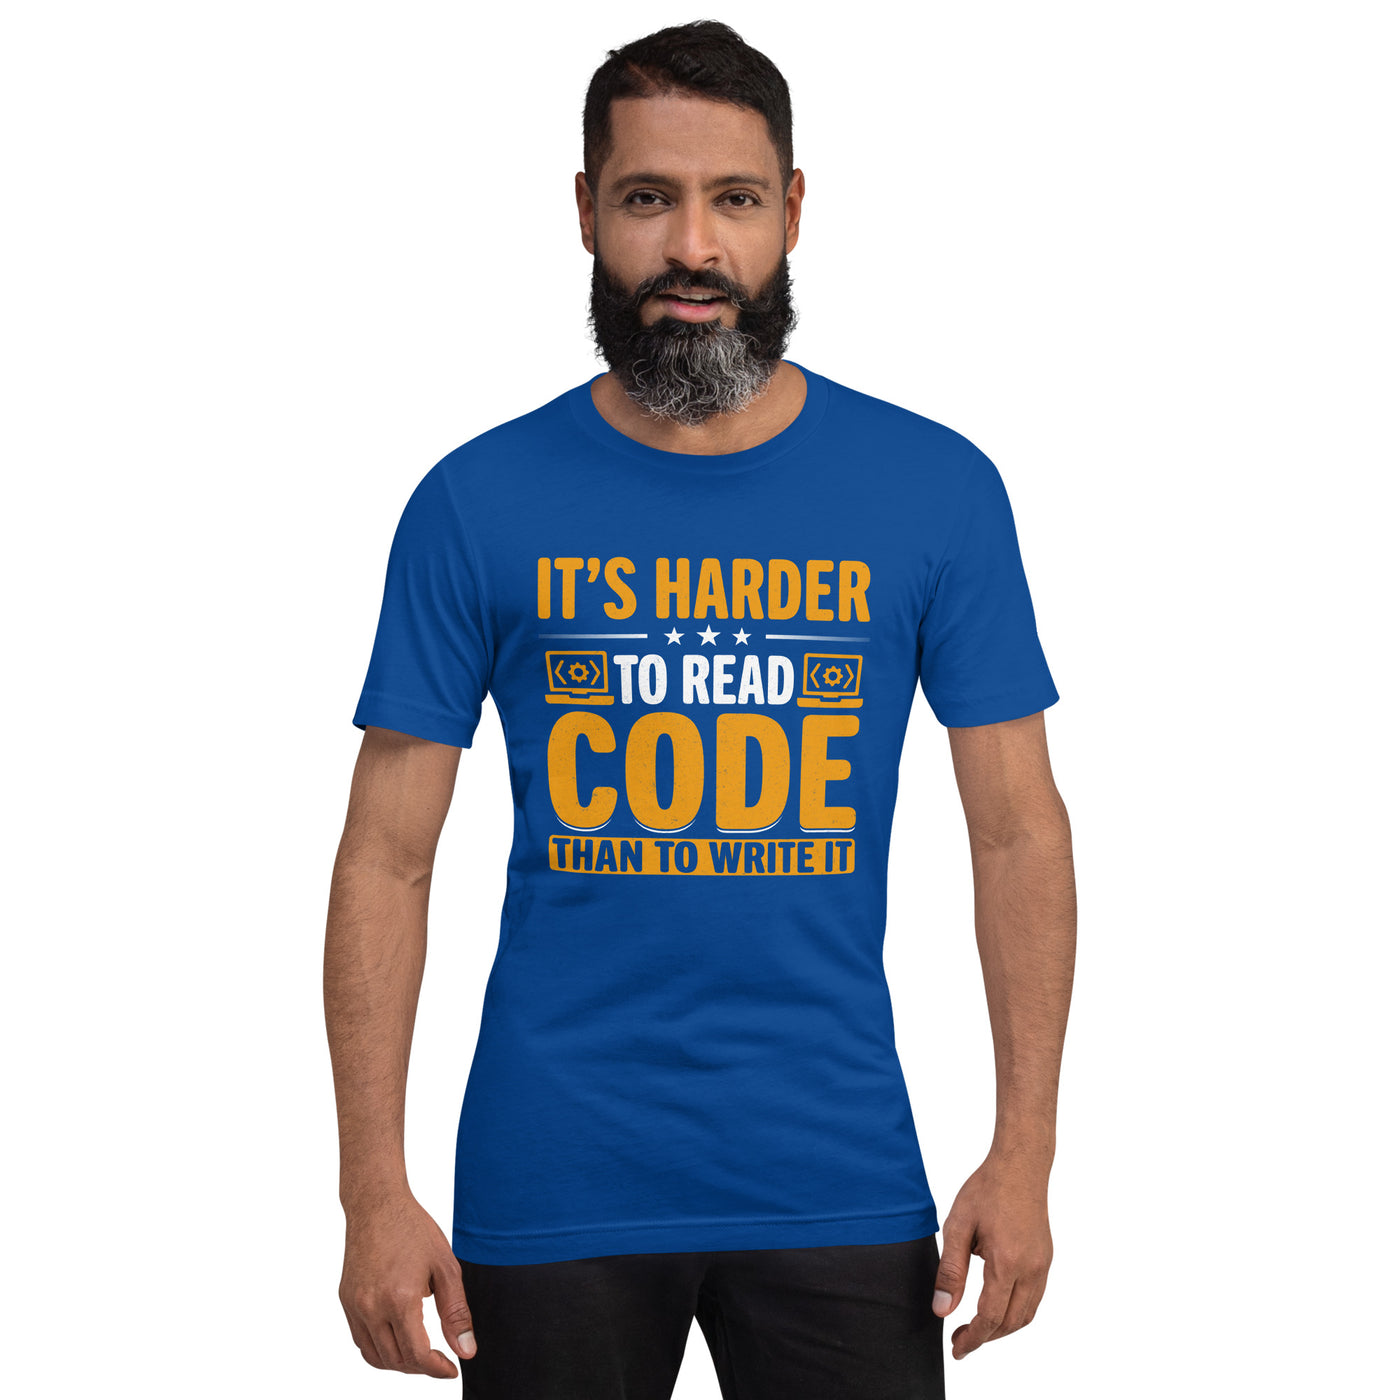 It's harder to read Code then to read it Unisex t-shirt